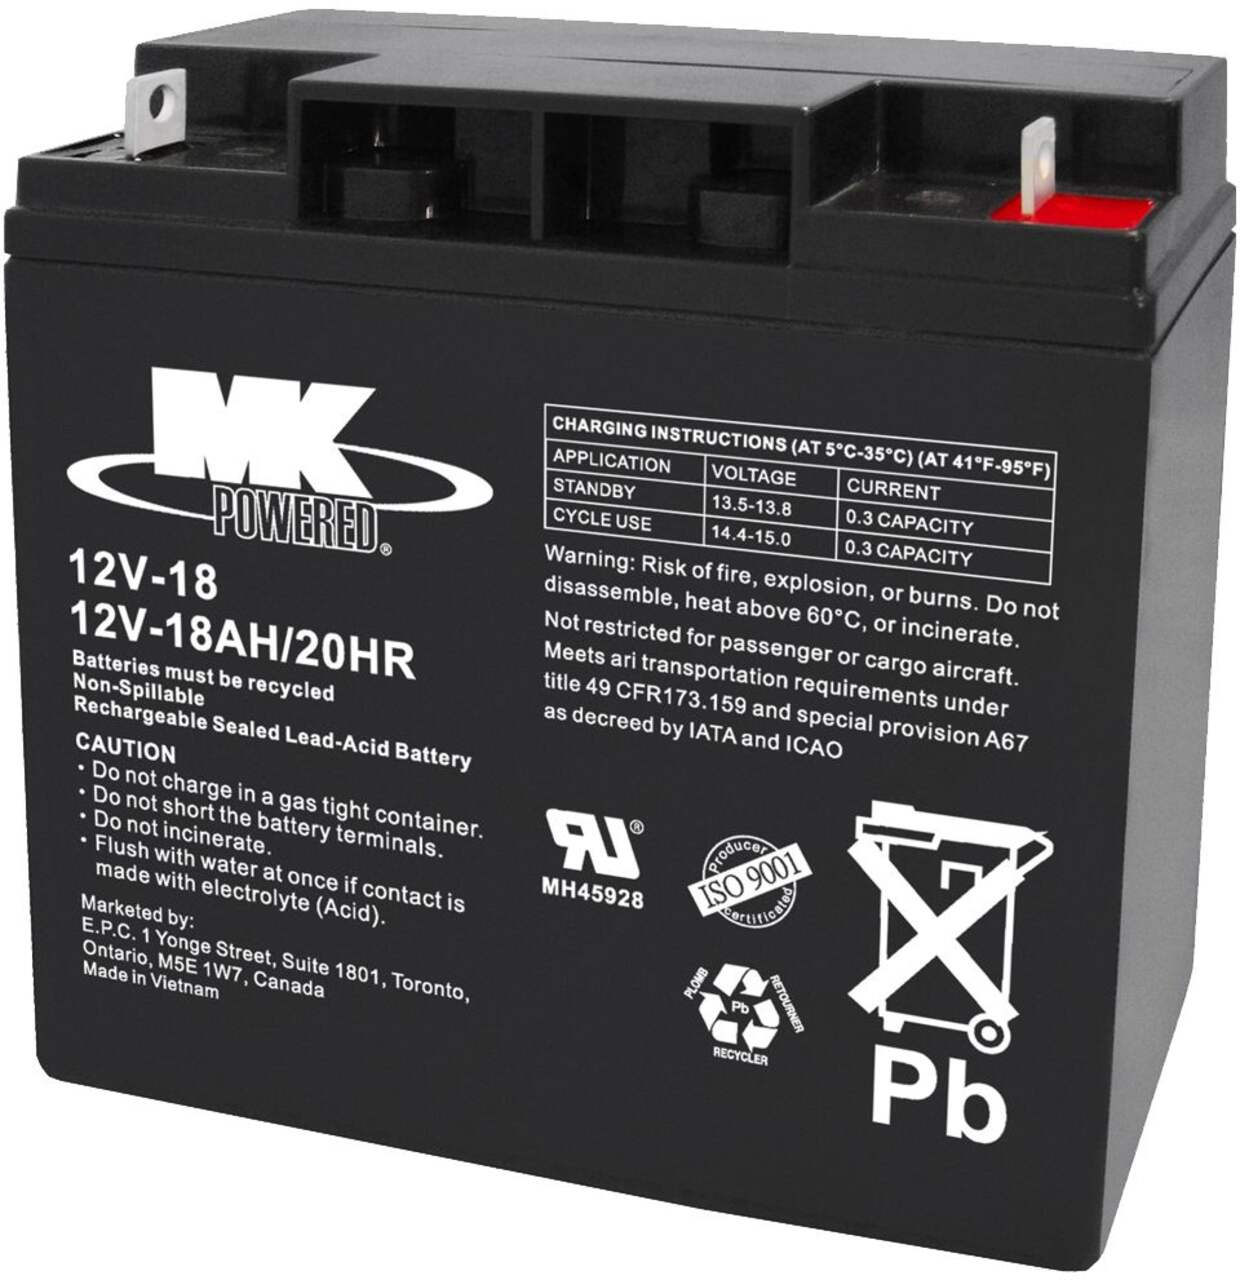 https://media-www.canadiantire.ca/product/automotive/light-auto-parts/auto-batteries/0102020/12-volt-18ah-sla-battery-7797533f-ff78-448e-a343-233c08628867-jpgrendition.jpg?imdensity=1&imwidth=640&impolicy=mZoom